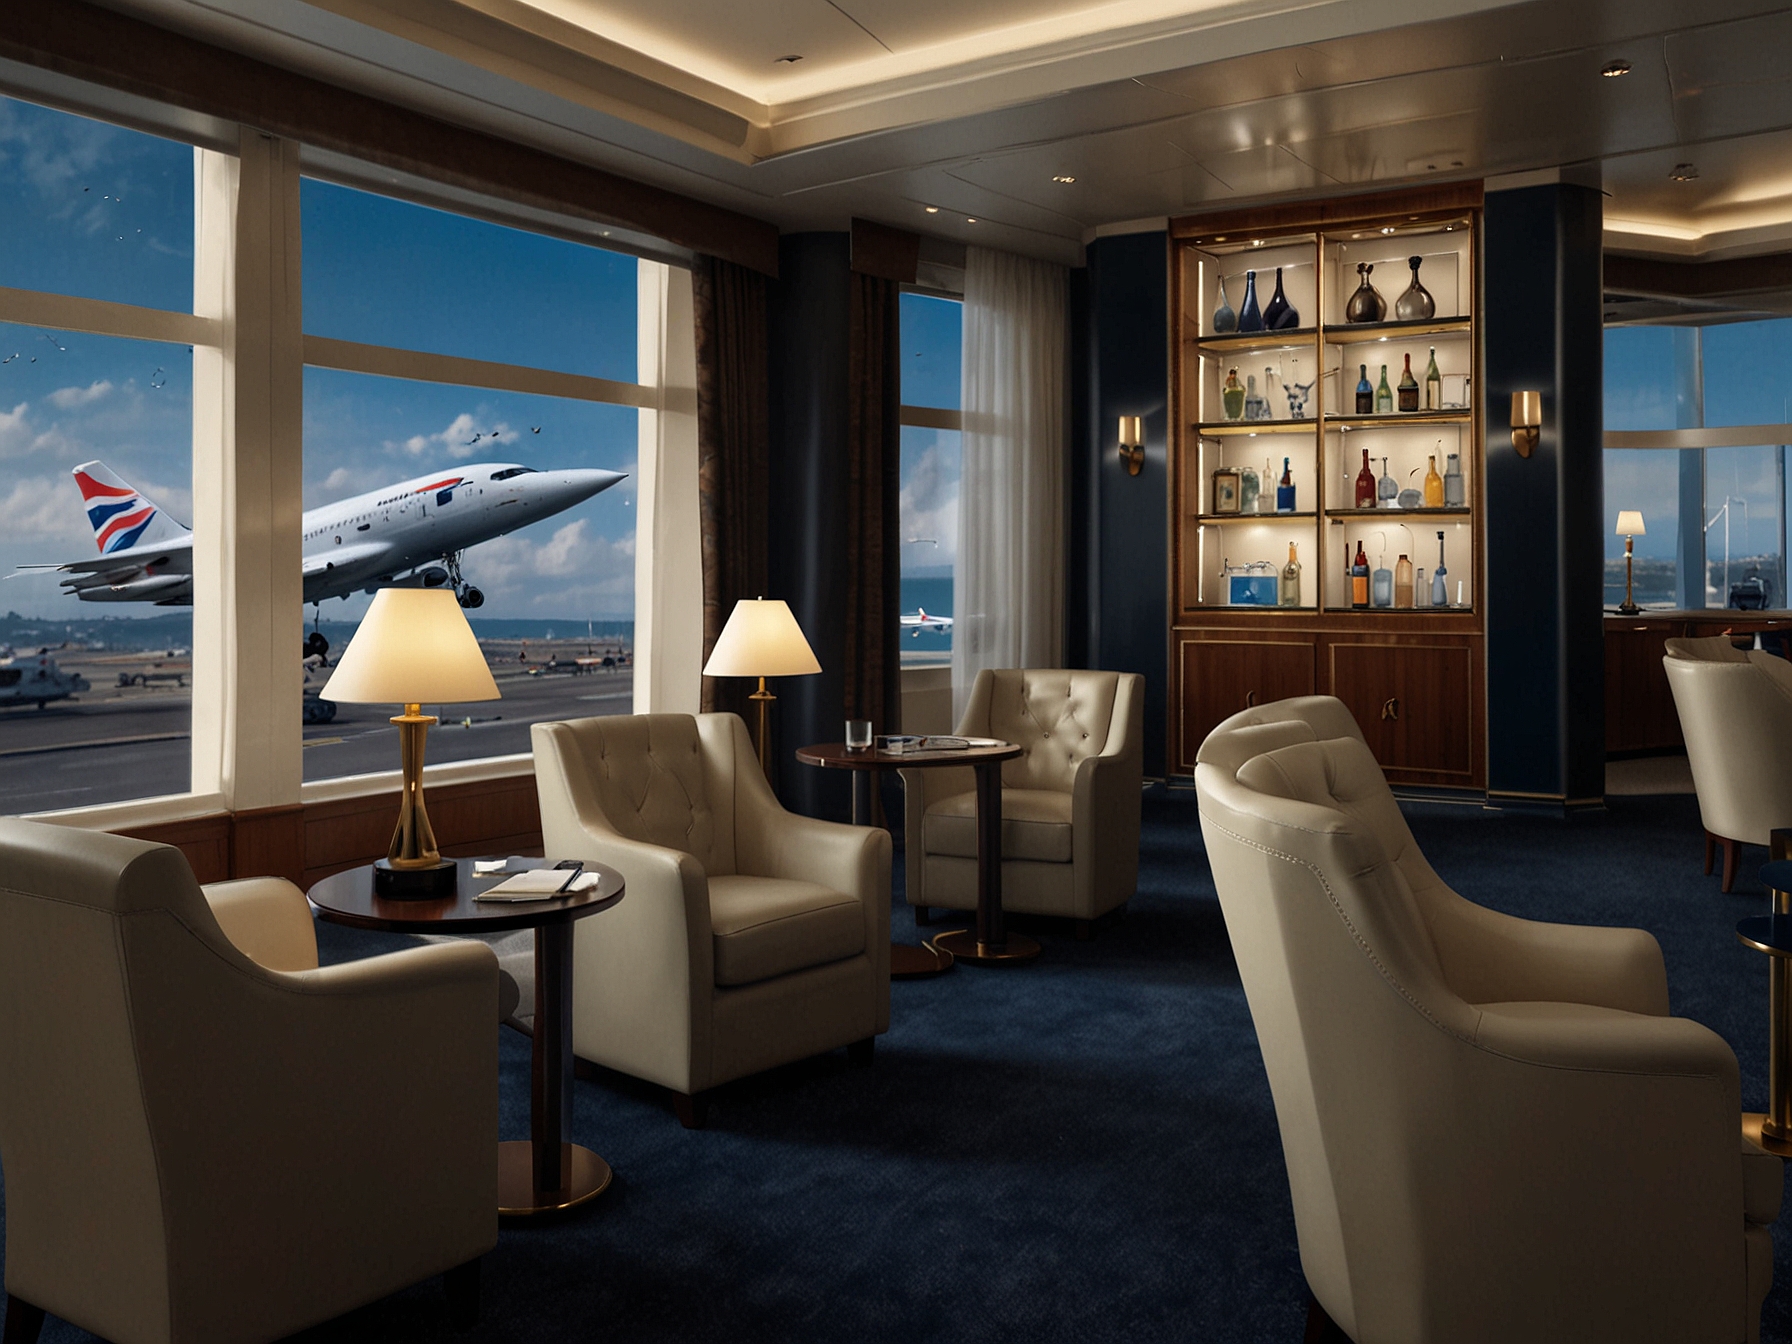 A look inside the Concorde Room, British Airways' exclusive lounge with private cabanas, à la carte dining, and panoramic runway views, showcasing the premium pre-flight experience for first-class passengers.